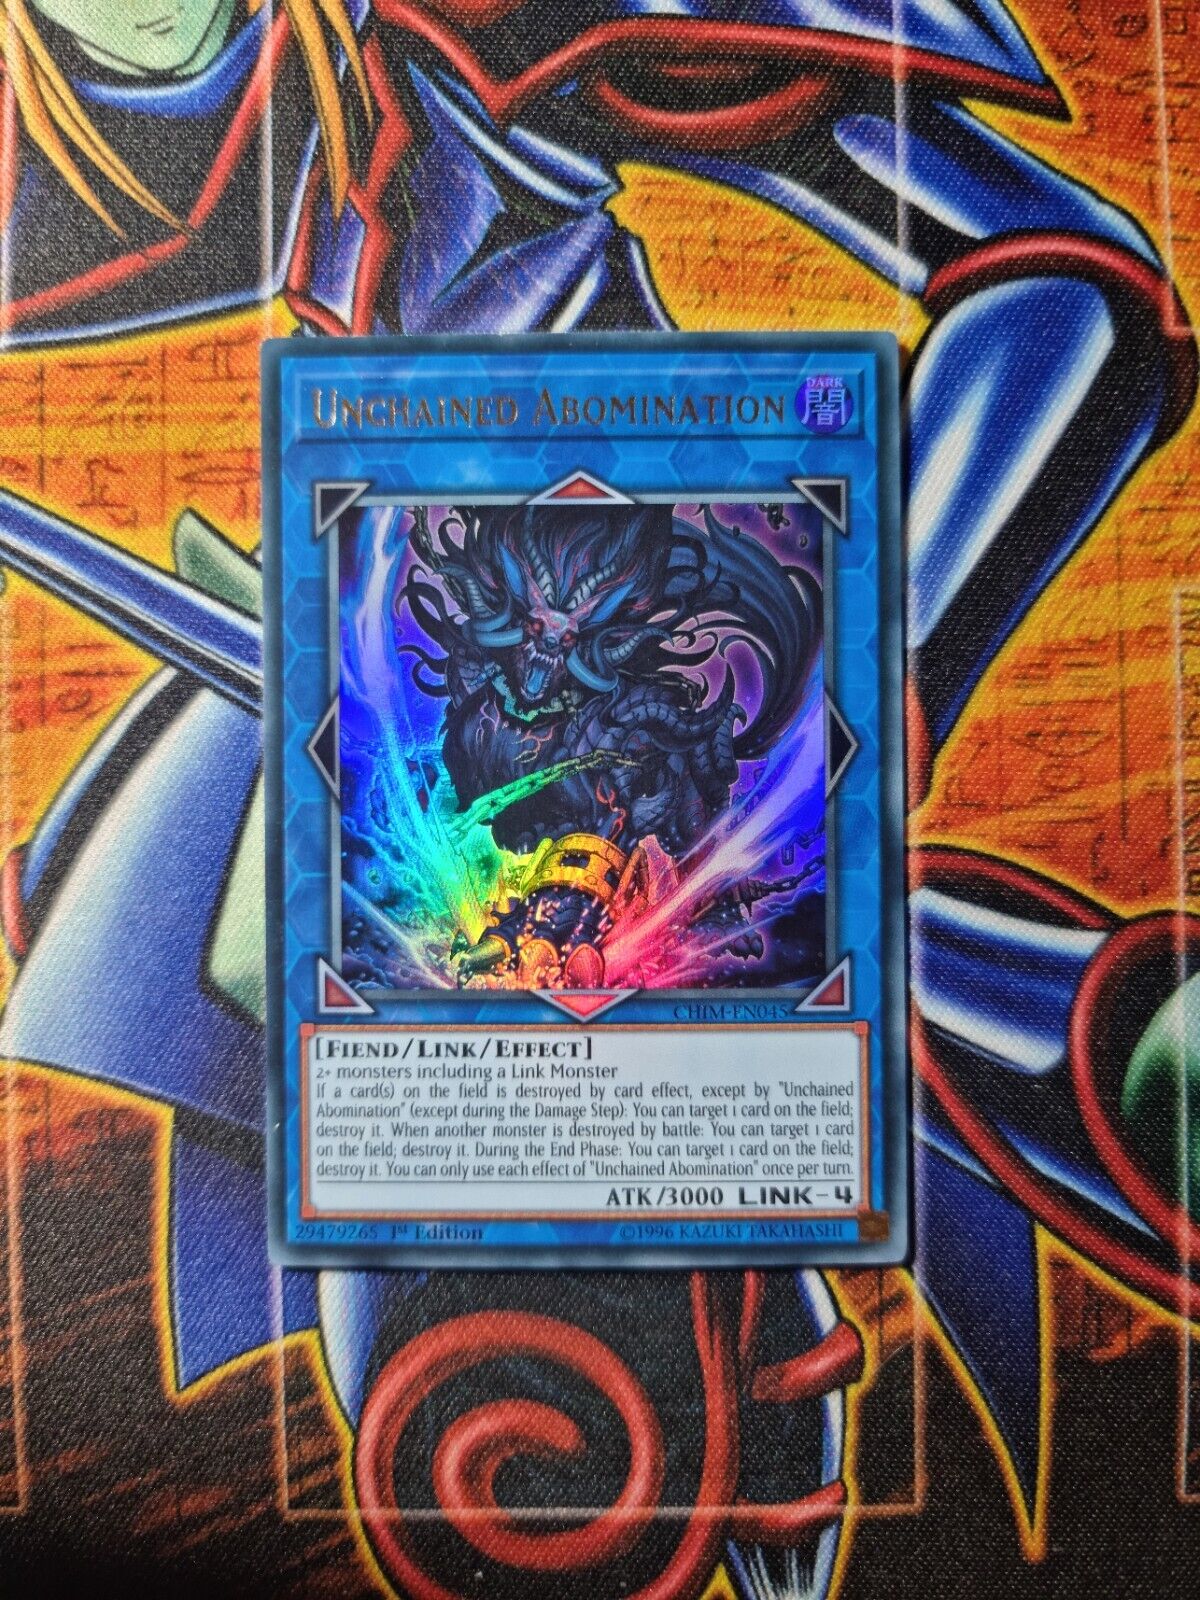 CHIM-EN045 Unchained Abomination Ultra Rare Yugioh Card 1st